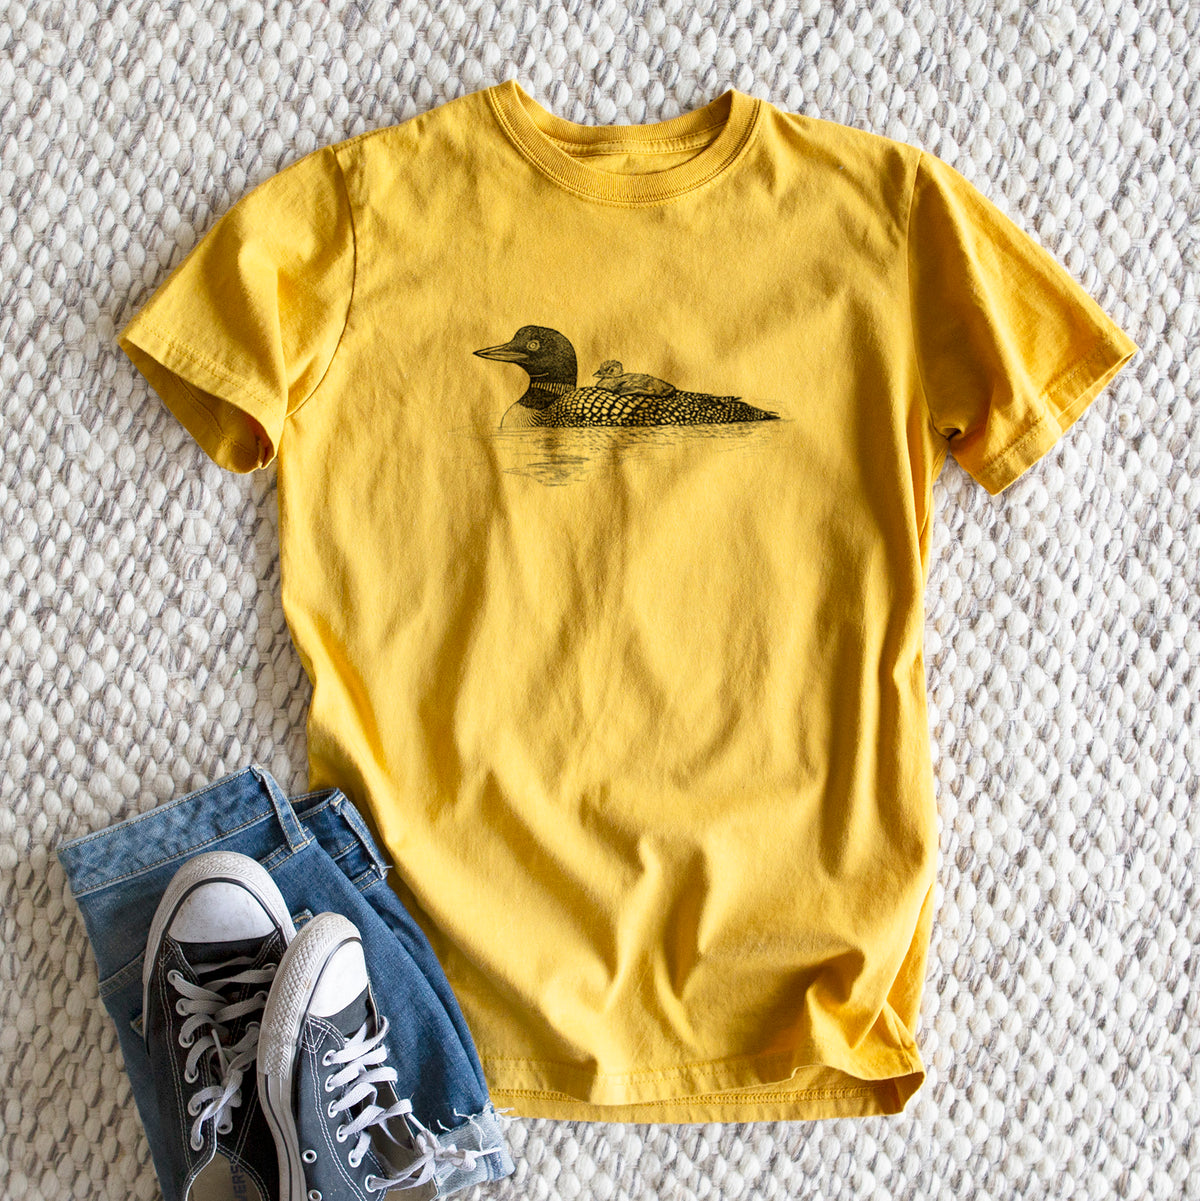 Common Loon with Chick - Gavia immer - Heavyweight Men&#39;s 100% Organic Cotton Tee